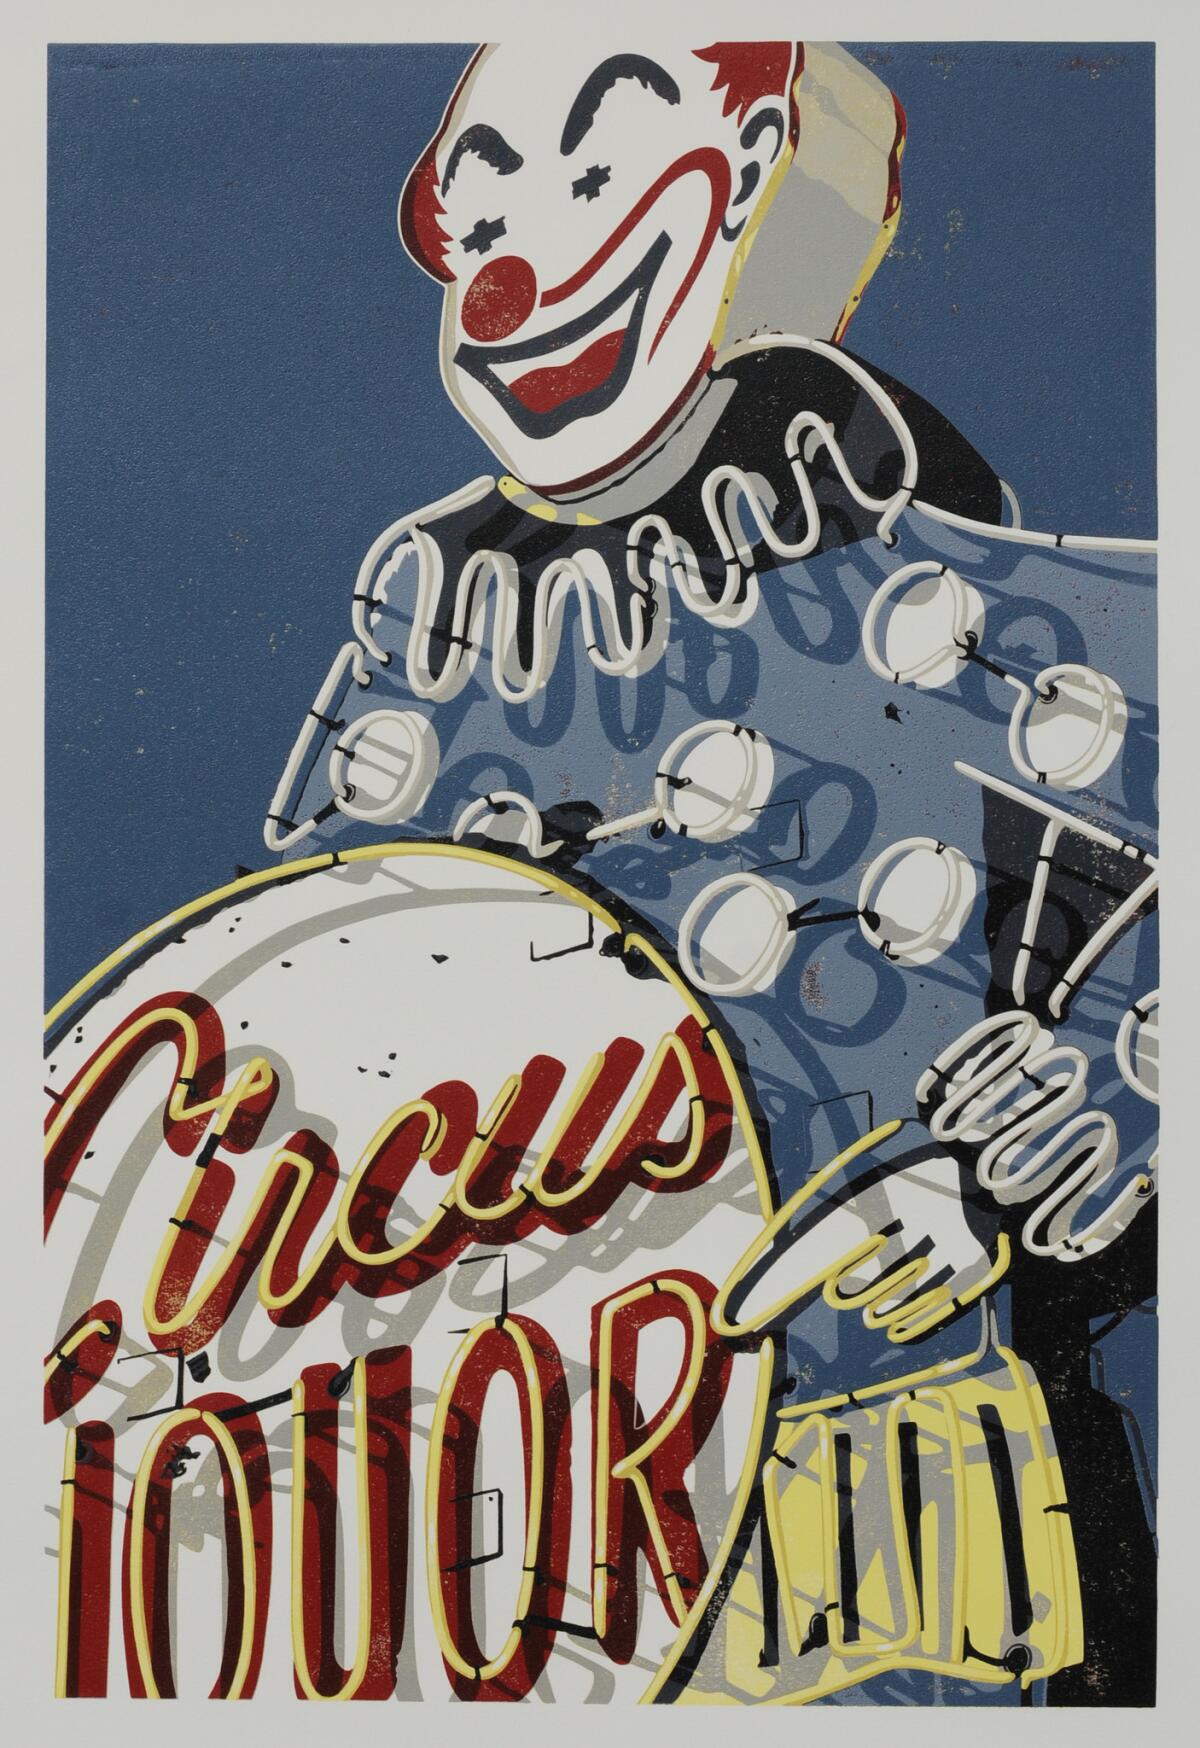 Dave Lefner's "Circus Liquor," 2011. Reduction linocut in 10 colors, 30 inches by 20 inches. (Dave Lefner)